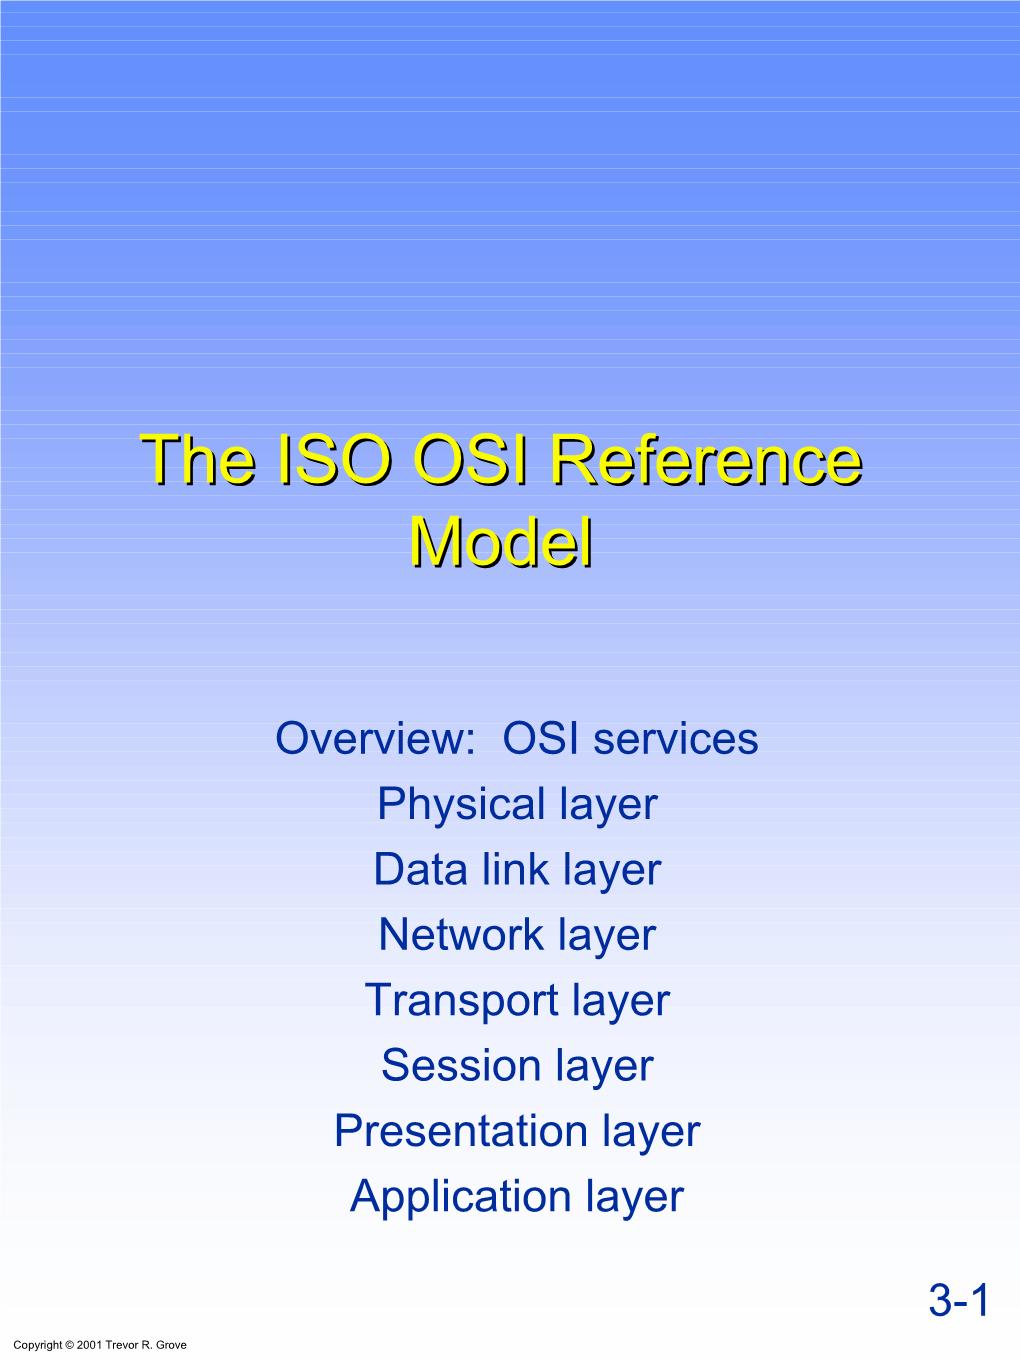 The ISO OSI Reference Model